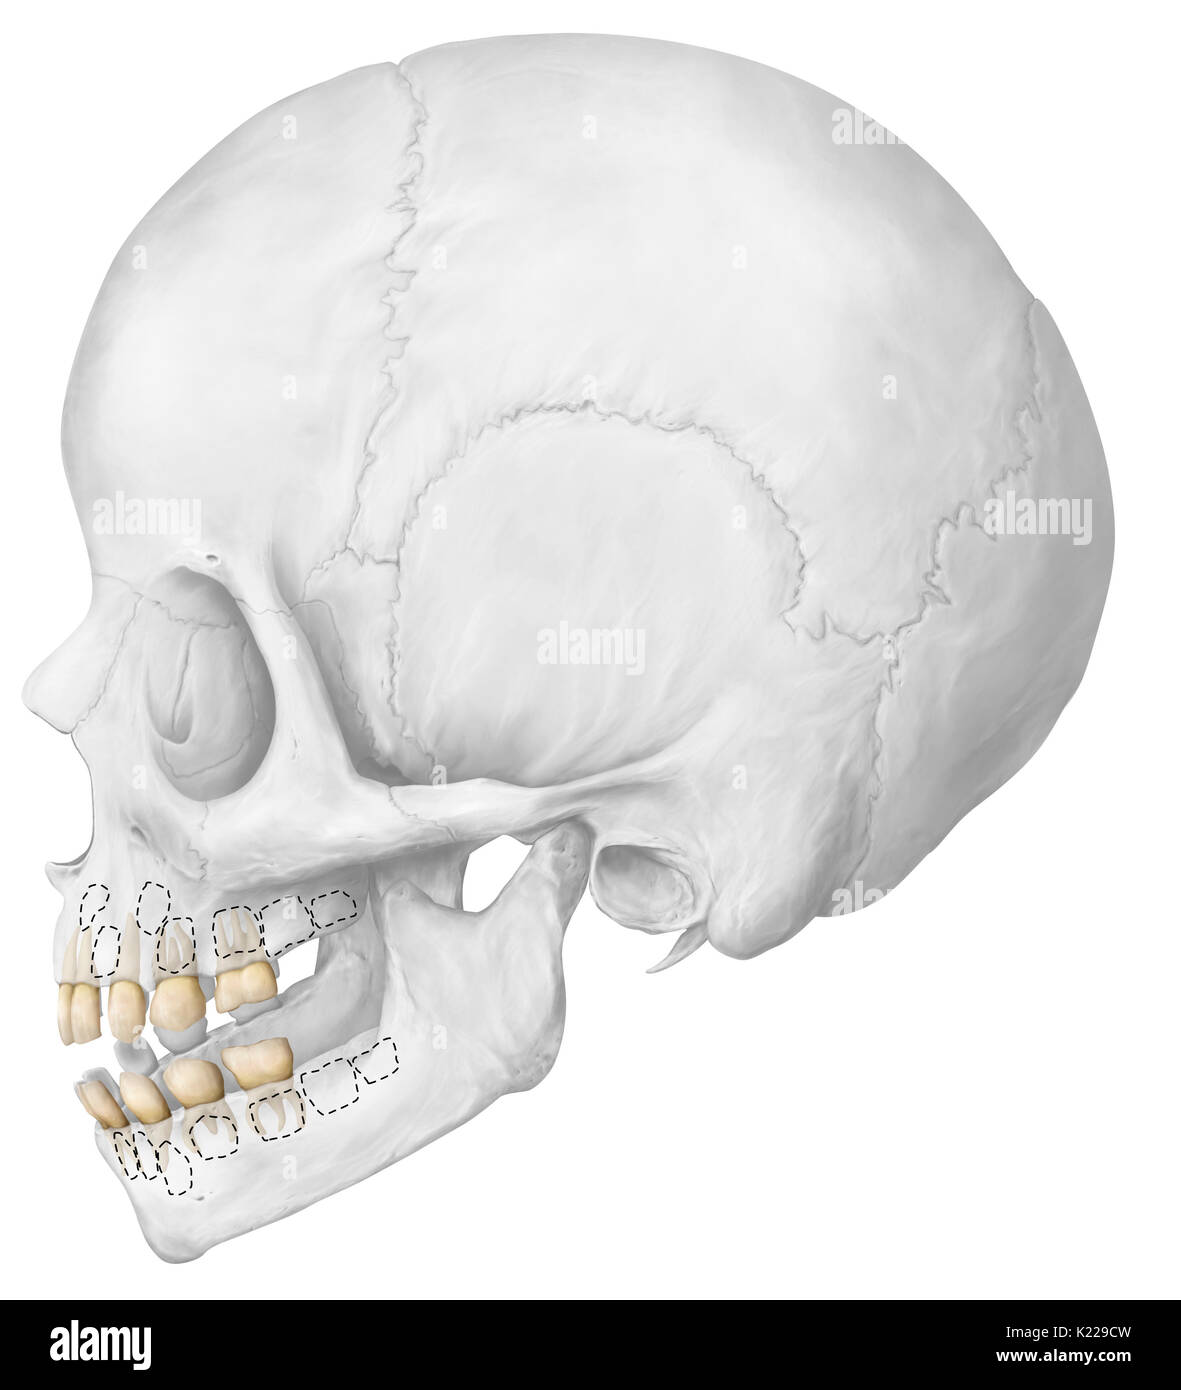 Until approximately the age of 6, the dentition has 20 temporary teeth. The complete adult dentition has 32 teeth: 8 incisors, 4 canines, 8 premolars, and 12 molars. The last molars, called wisdom teeth, are sometimes absent or poorly positioned. Stock Photo